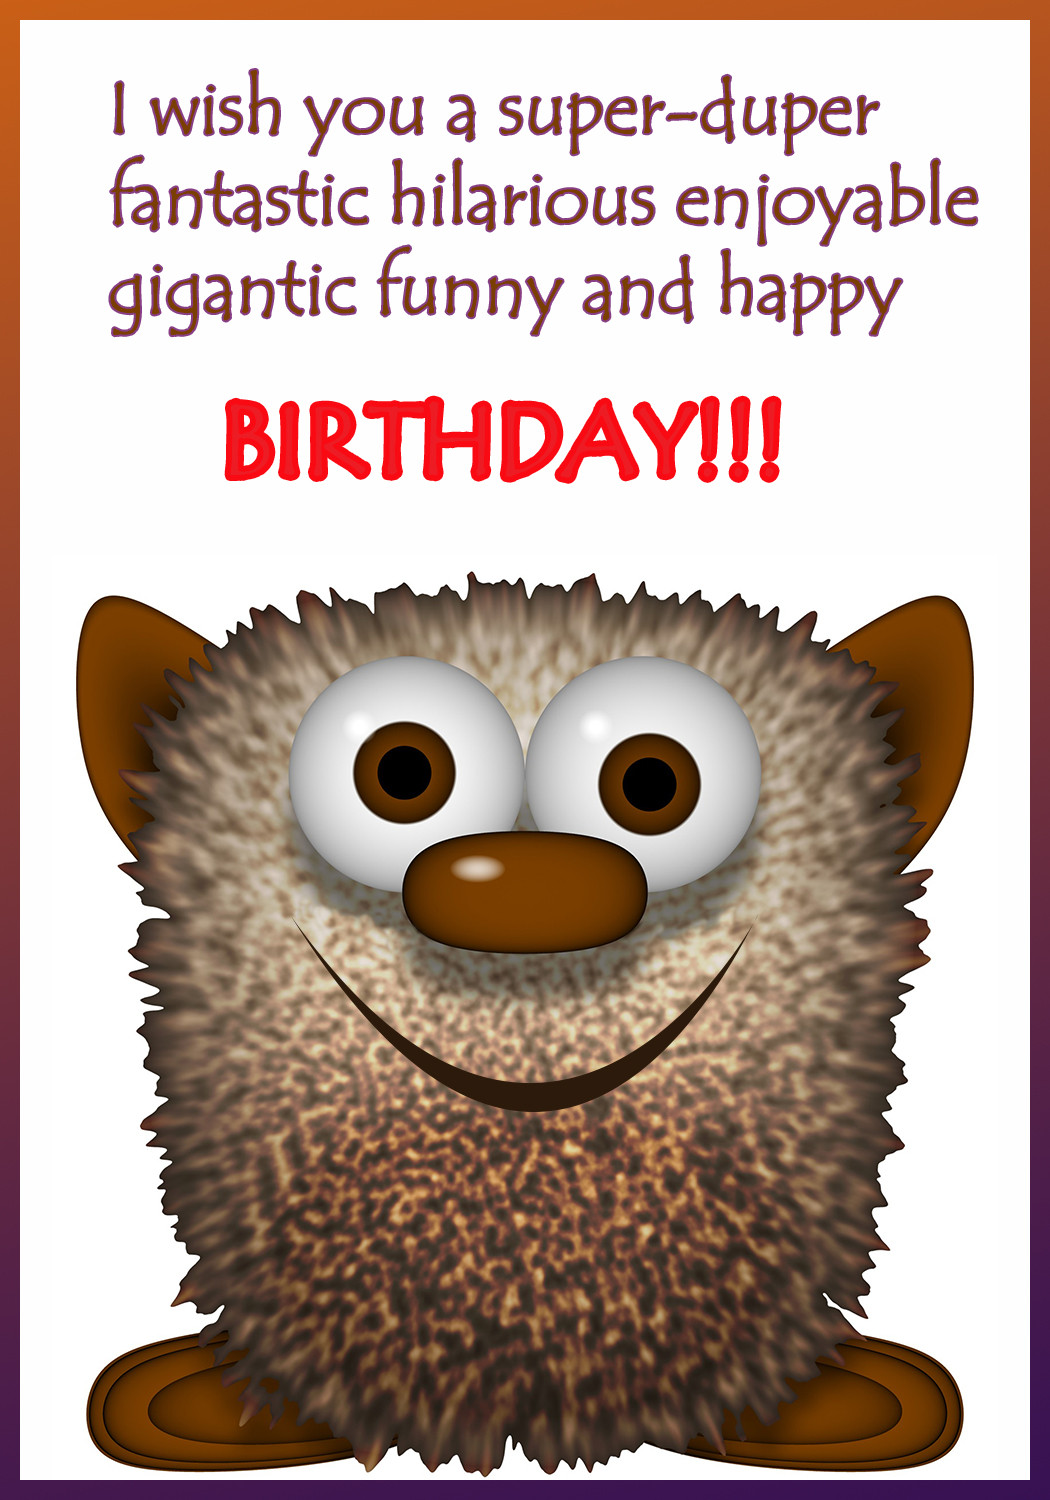 Funny Birthday Card Images
 Funny Printable Birthday Cards